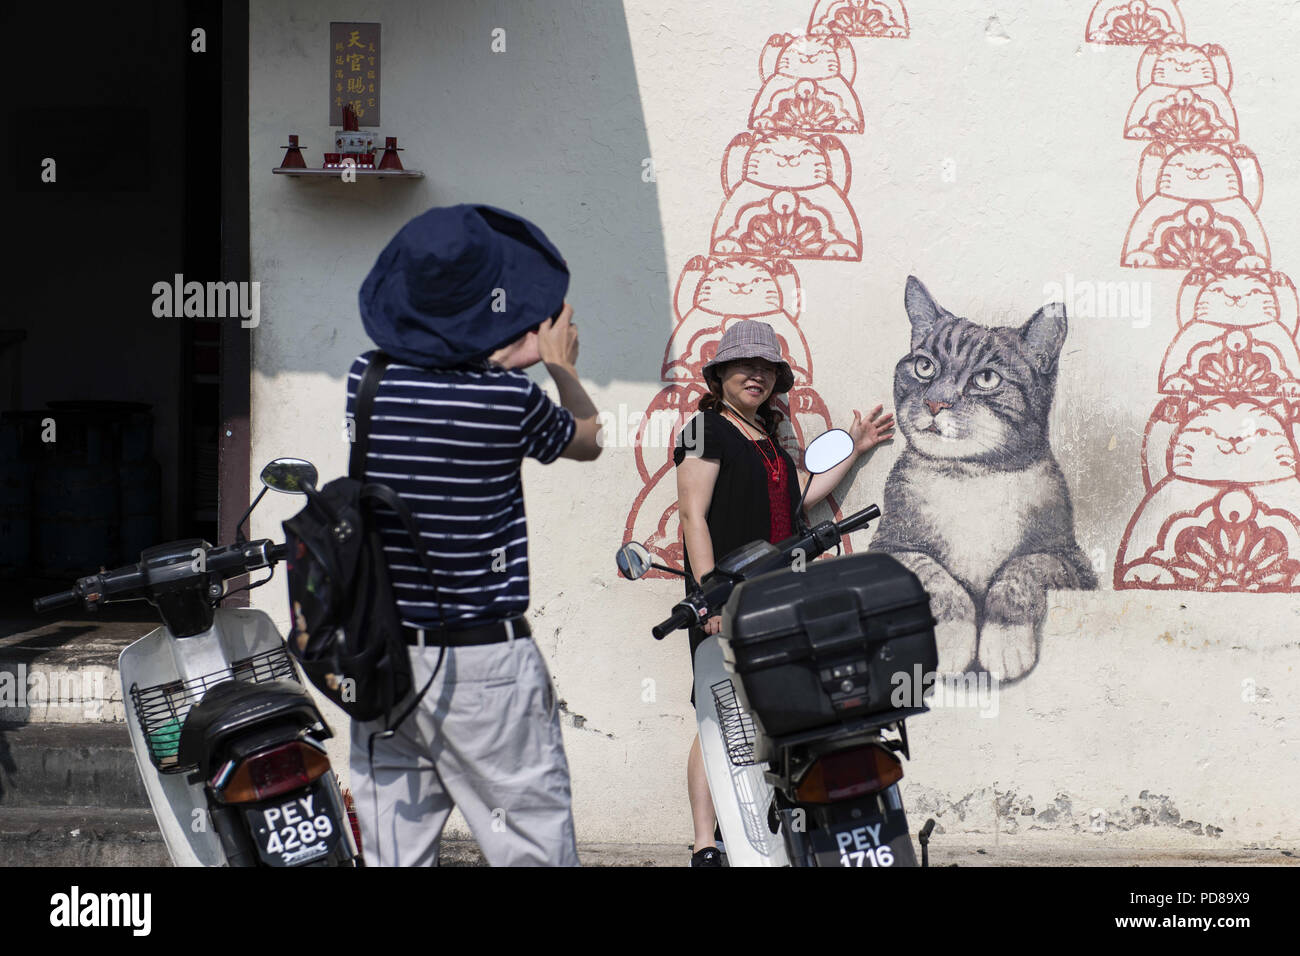 George Town, Penang, Malaysia. 29th Apr, 2017. A woman seen posing next to a mural called Love Me Like Your Fortune Cat, Located in Lebuh Armenian Street, it is part of a cat-related street art collection created by Natthaton Muangkliang, Ang Yeok Khang and Louise Low whose purpose consisted in creating more awareness towards stray animals.George Town, the capital City of Penang Island in Malaysia, is known for its blend of cultures, colonial heritage and street food. A few years ago a project developed by the municipality gave a new life to the streets of the city when several artists lent Stock Photo